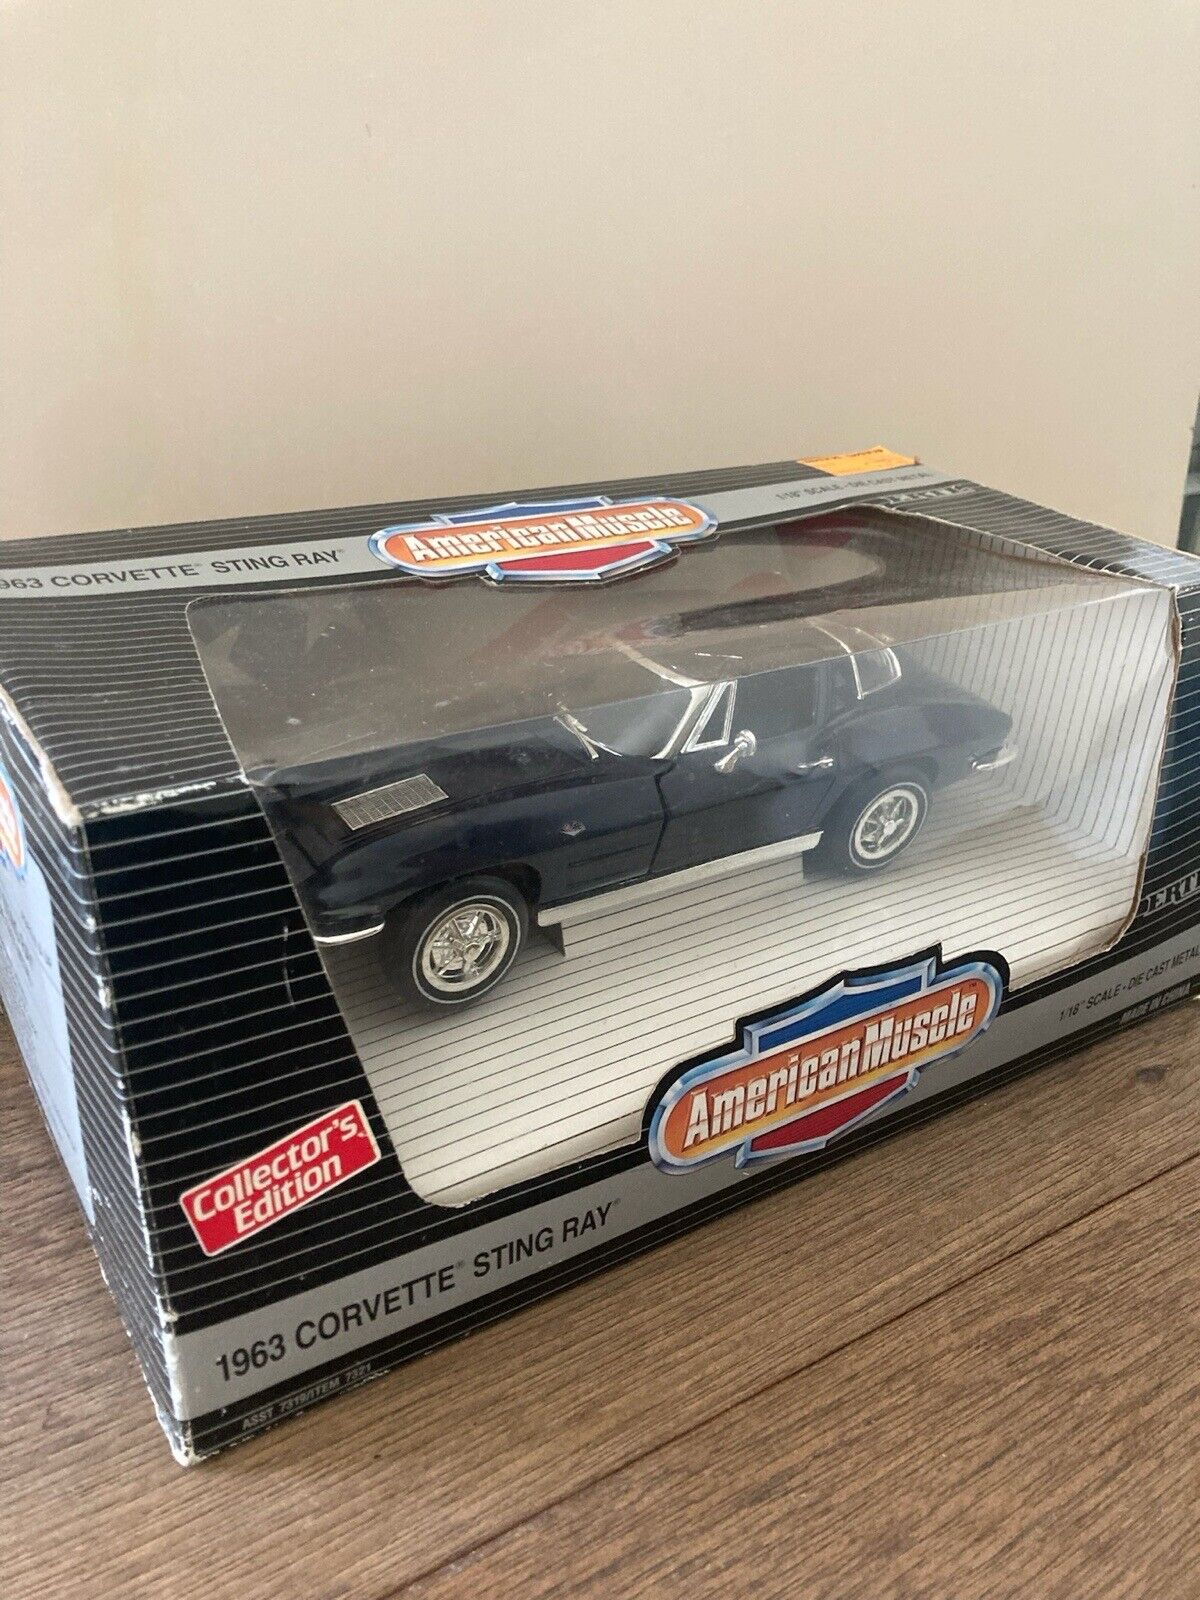 1963 CORVETTE STING RAY Model Car 1:18 Scale American Muscle Brand